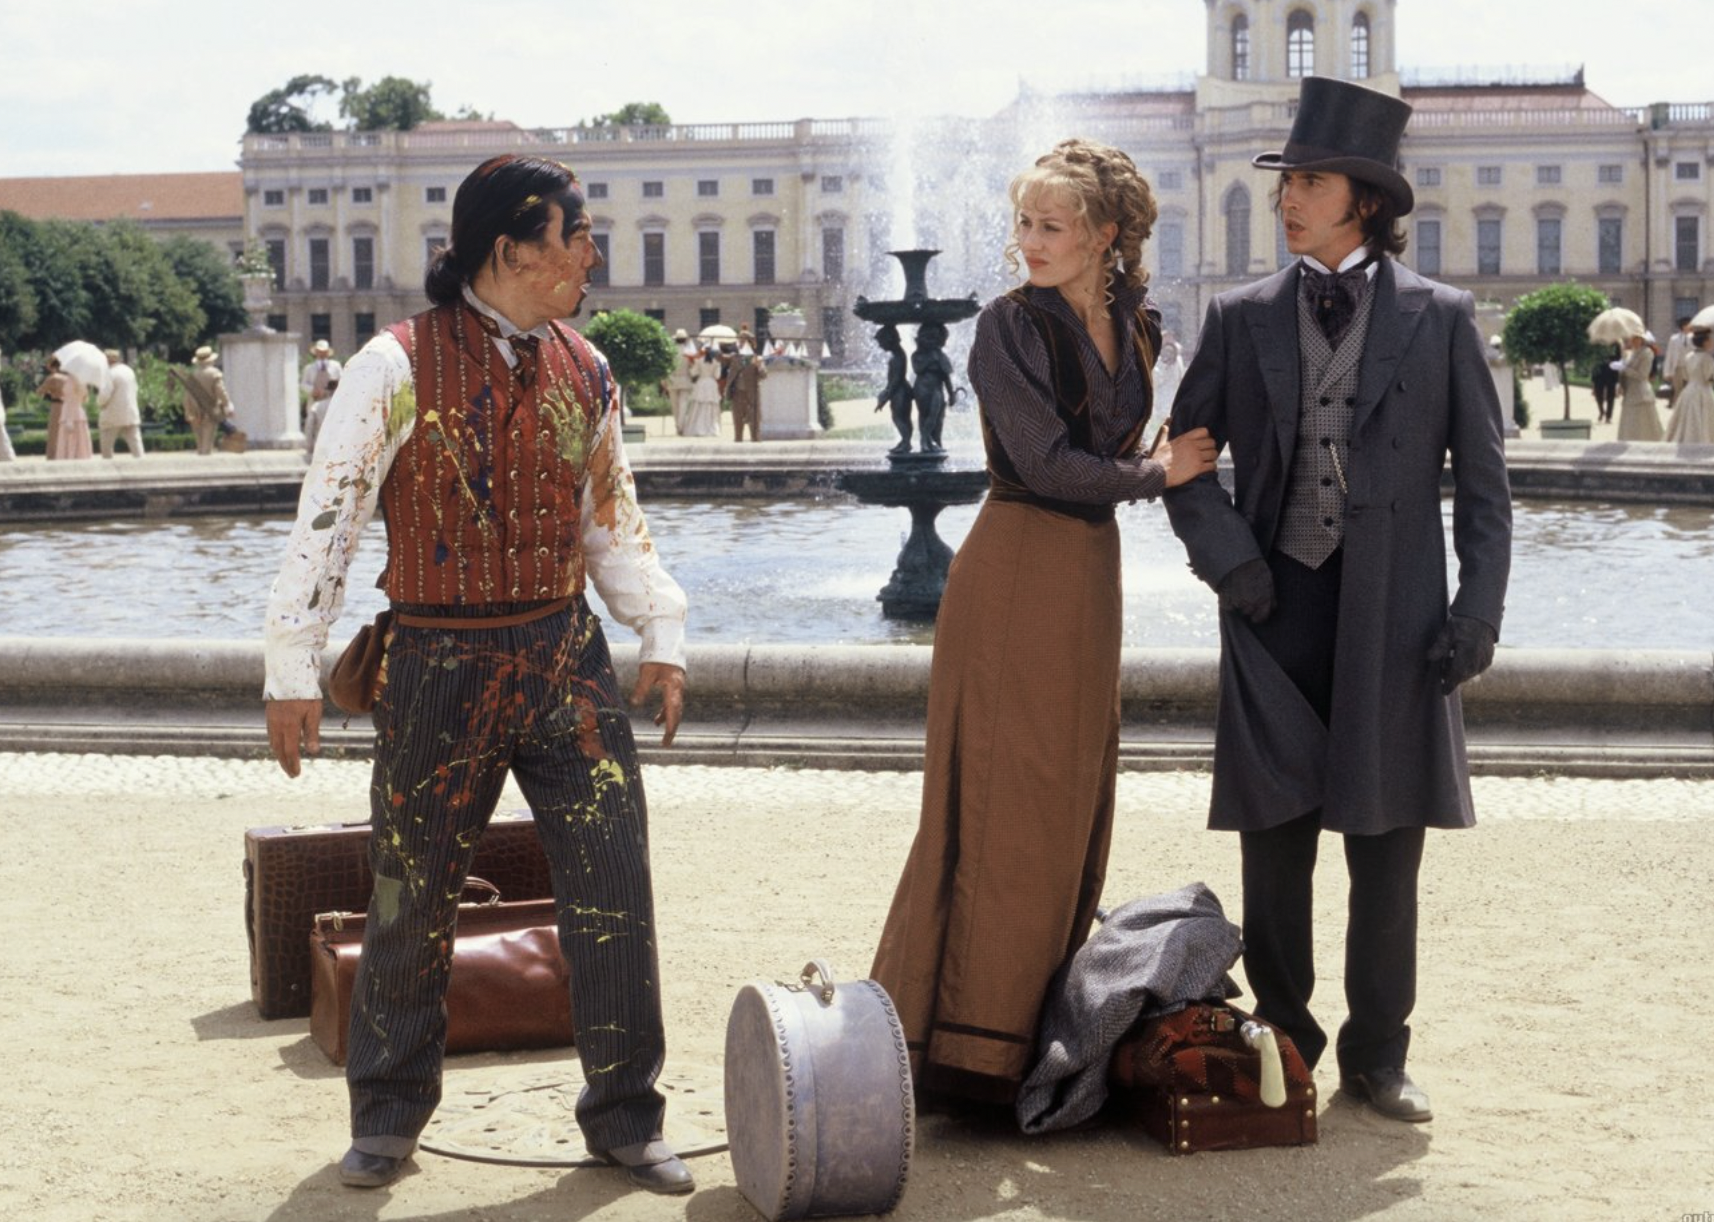 Jackie Chan, Steve Coogan, and Cécile de France in "Around the World in 80 Days"